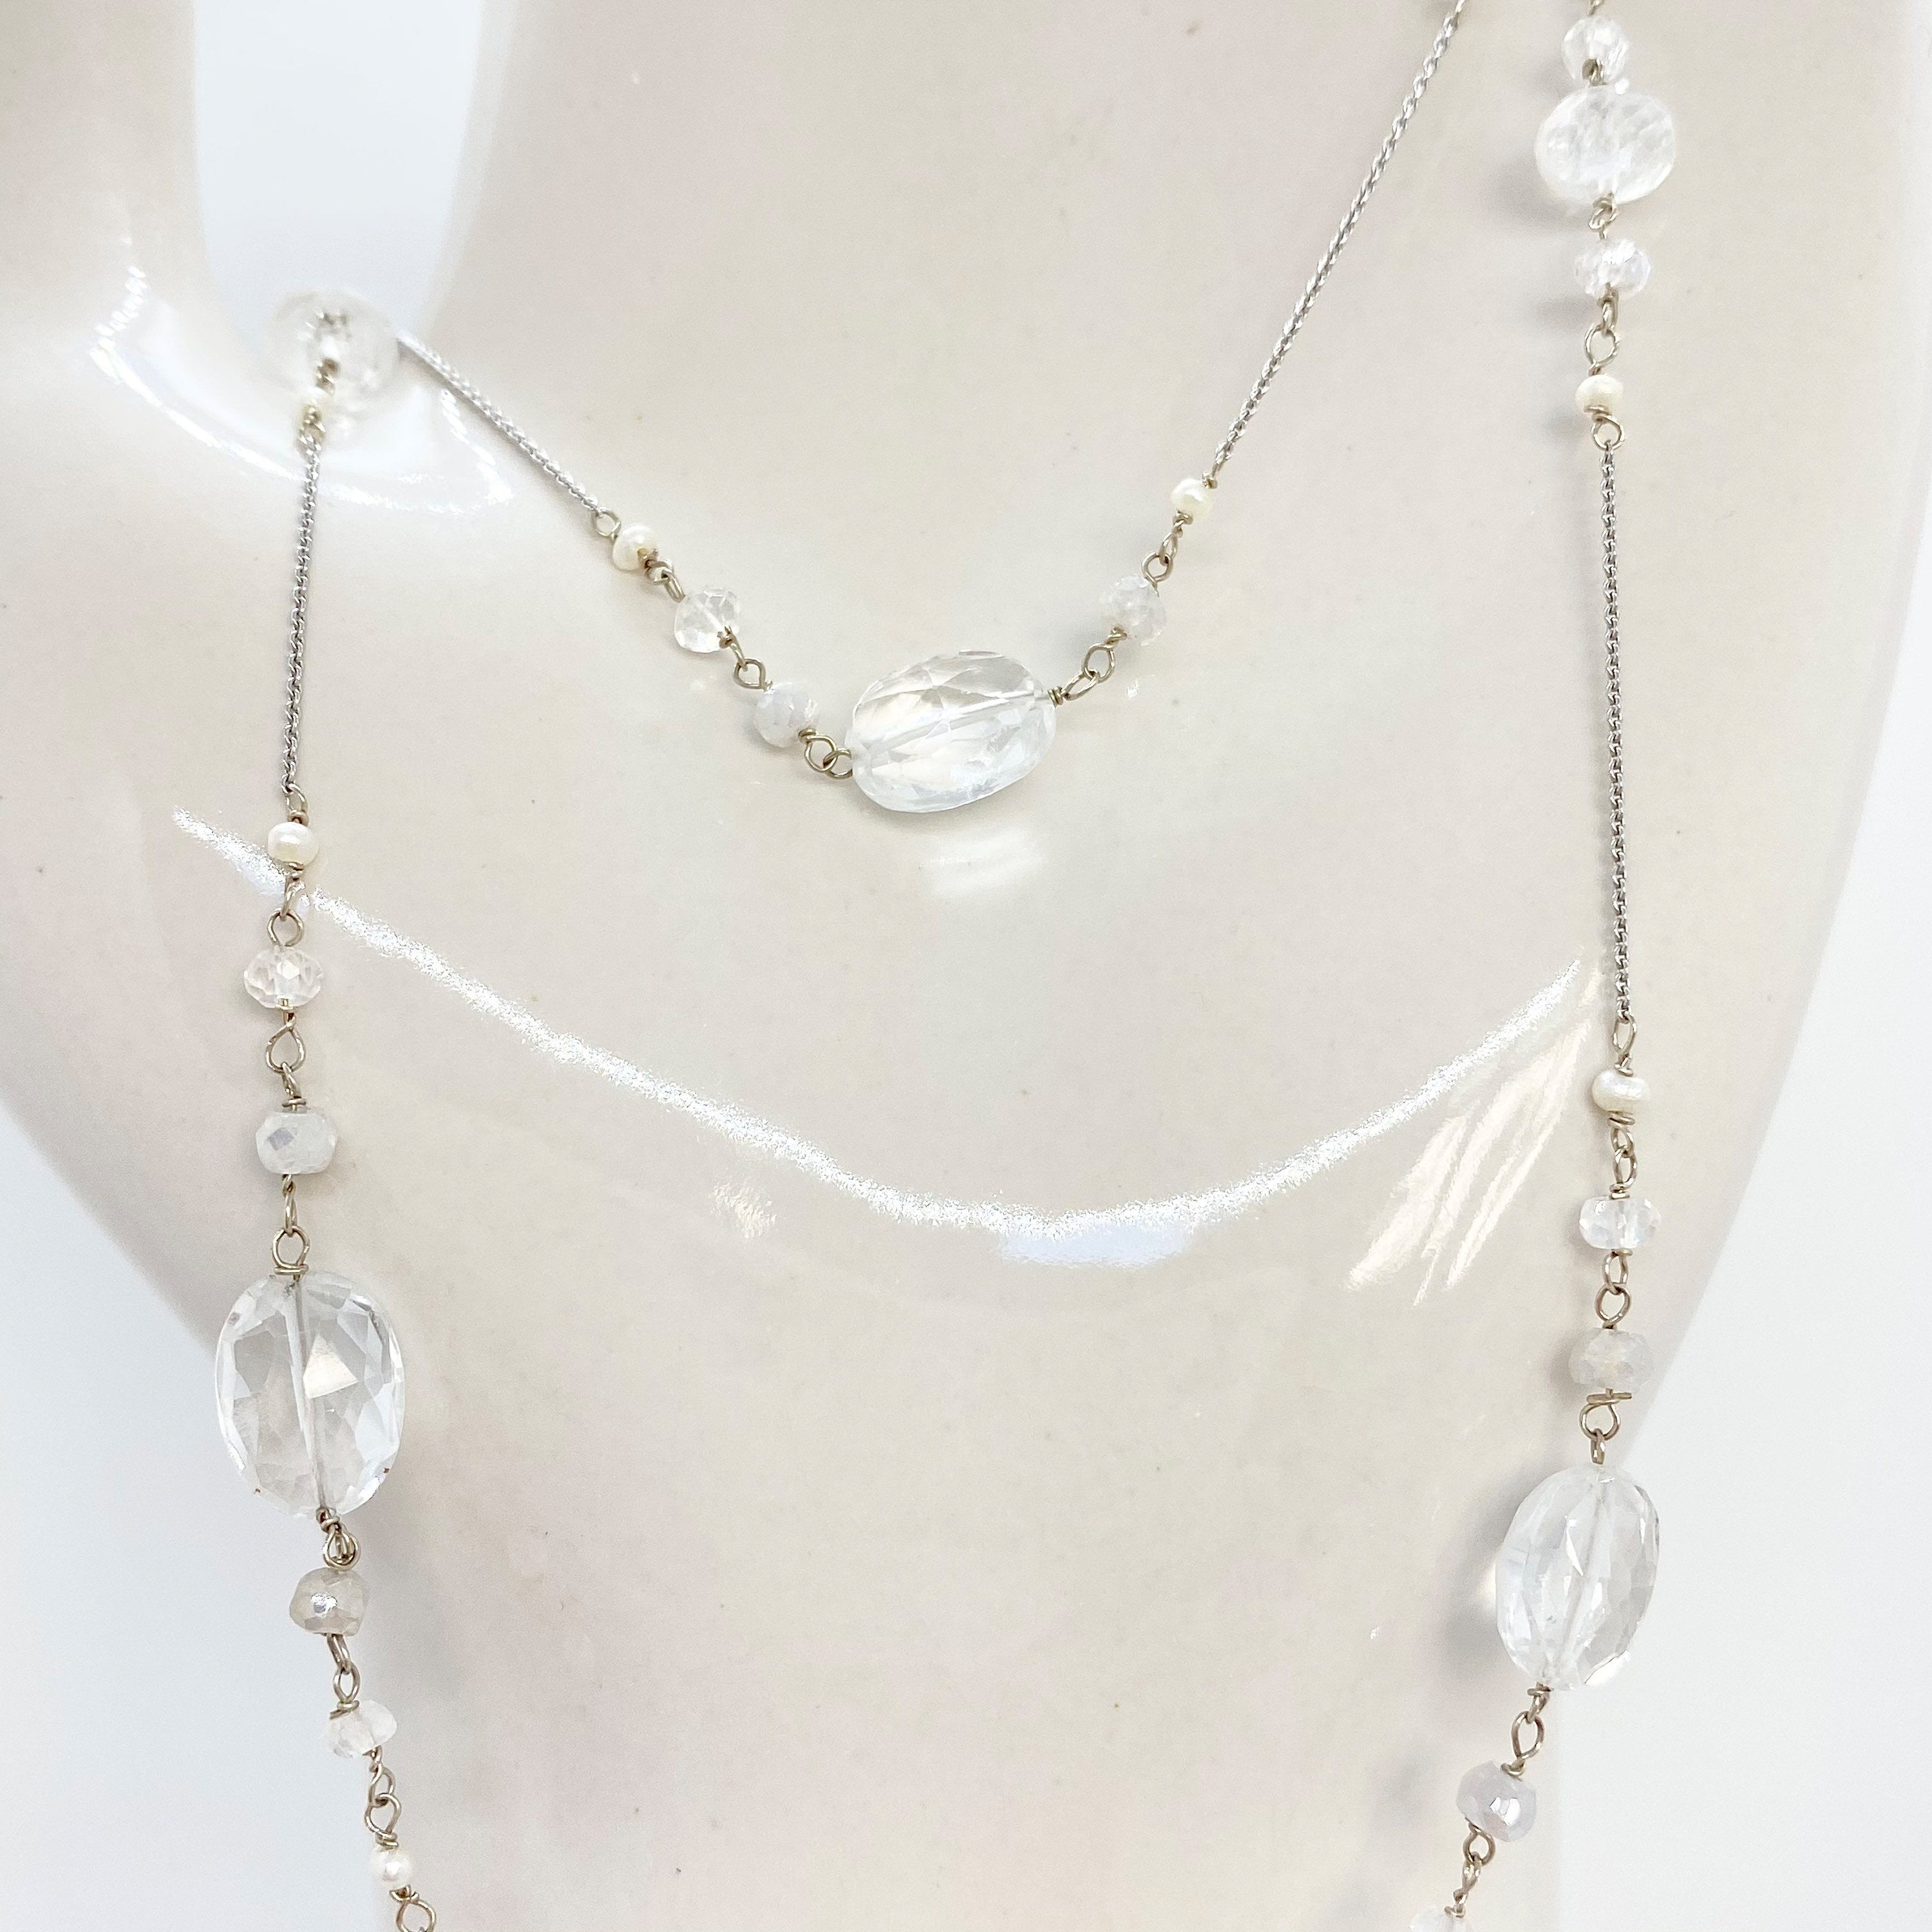 14K GOLD CHAIN Necklace - White Gold Necklace - Moonstone Necklace - Freshwater Pearls - Women Gold Jewelry - White Gold Chain